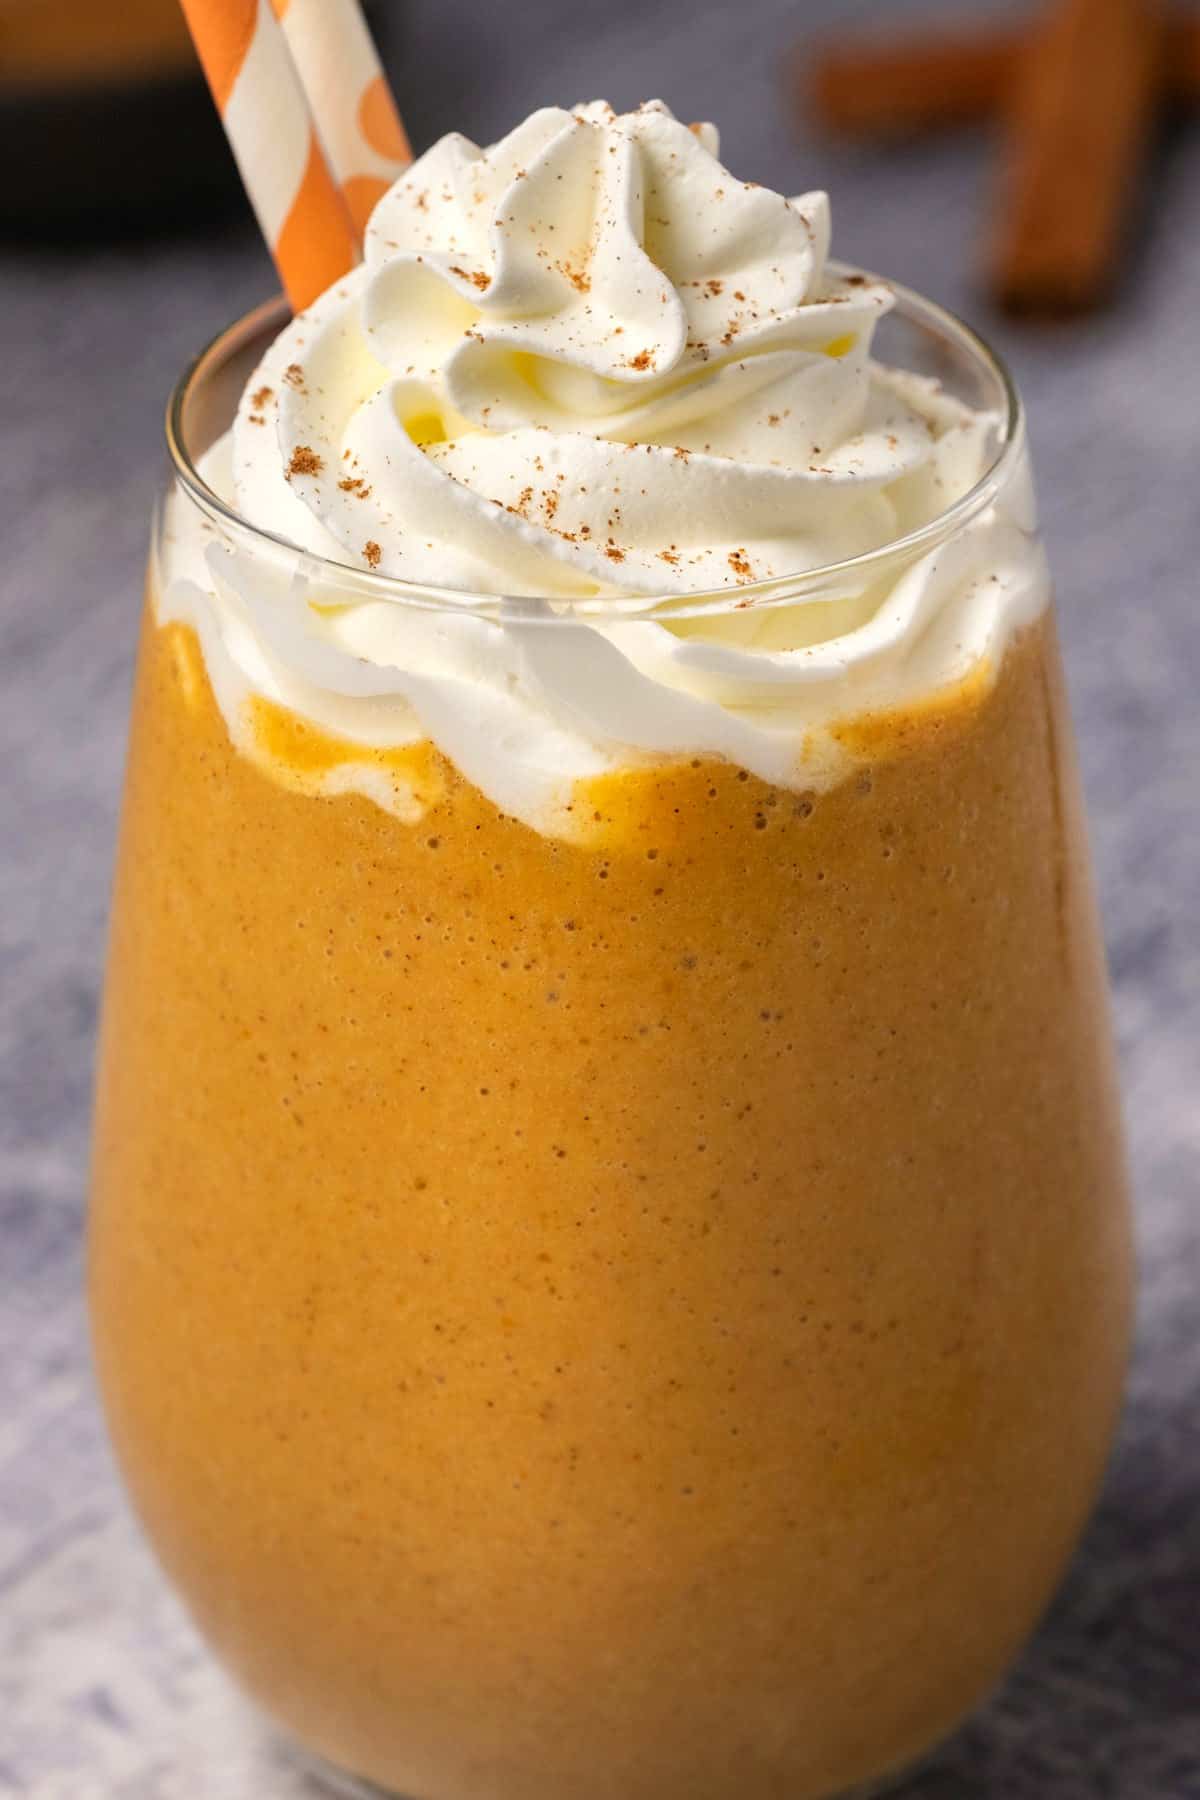 Pumpkin smoothie topped with whipped cream in a glass with two orange and white straws.